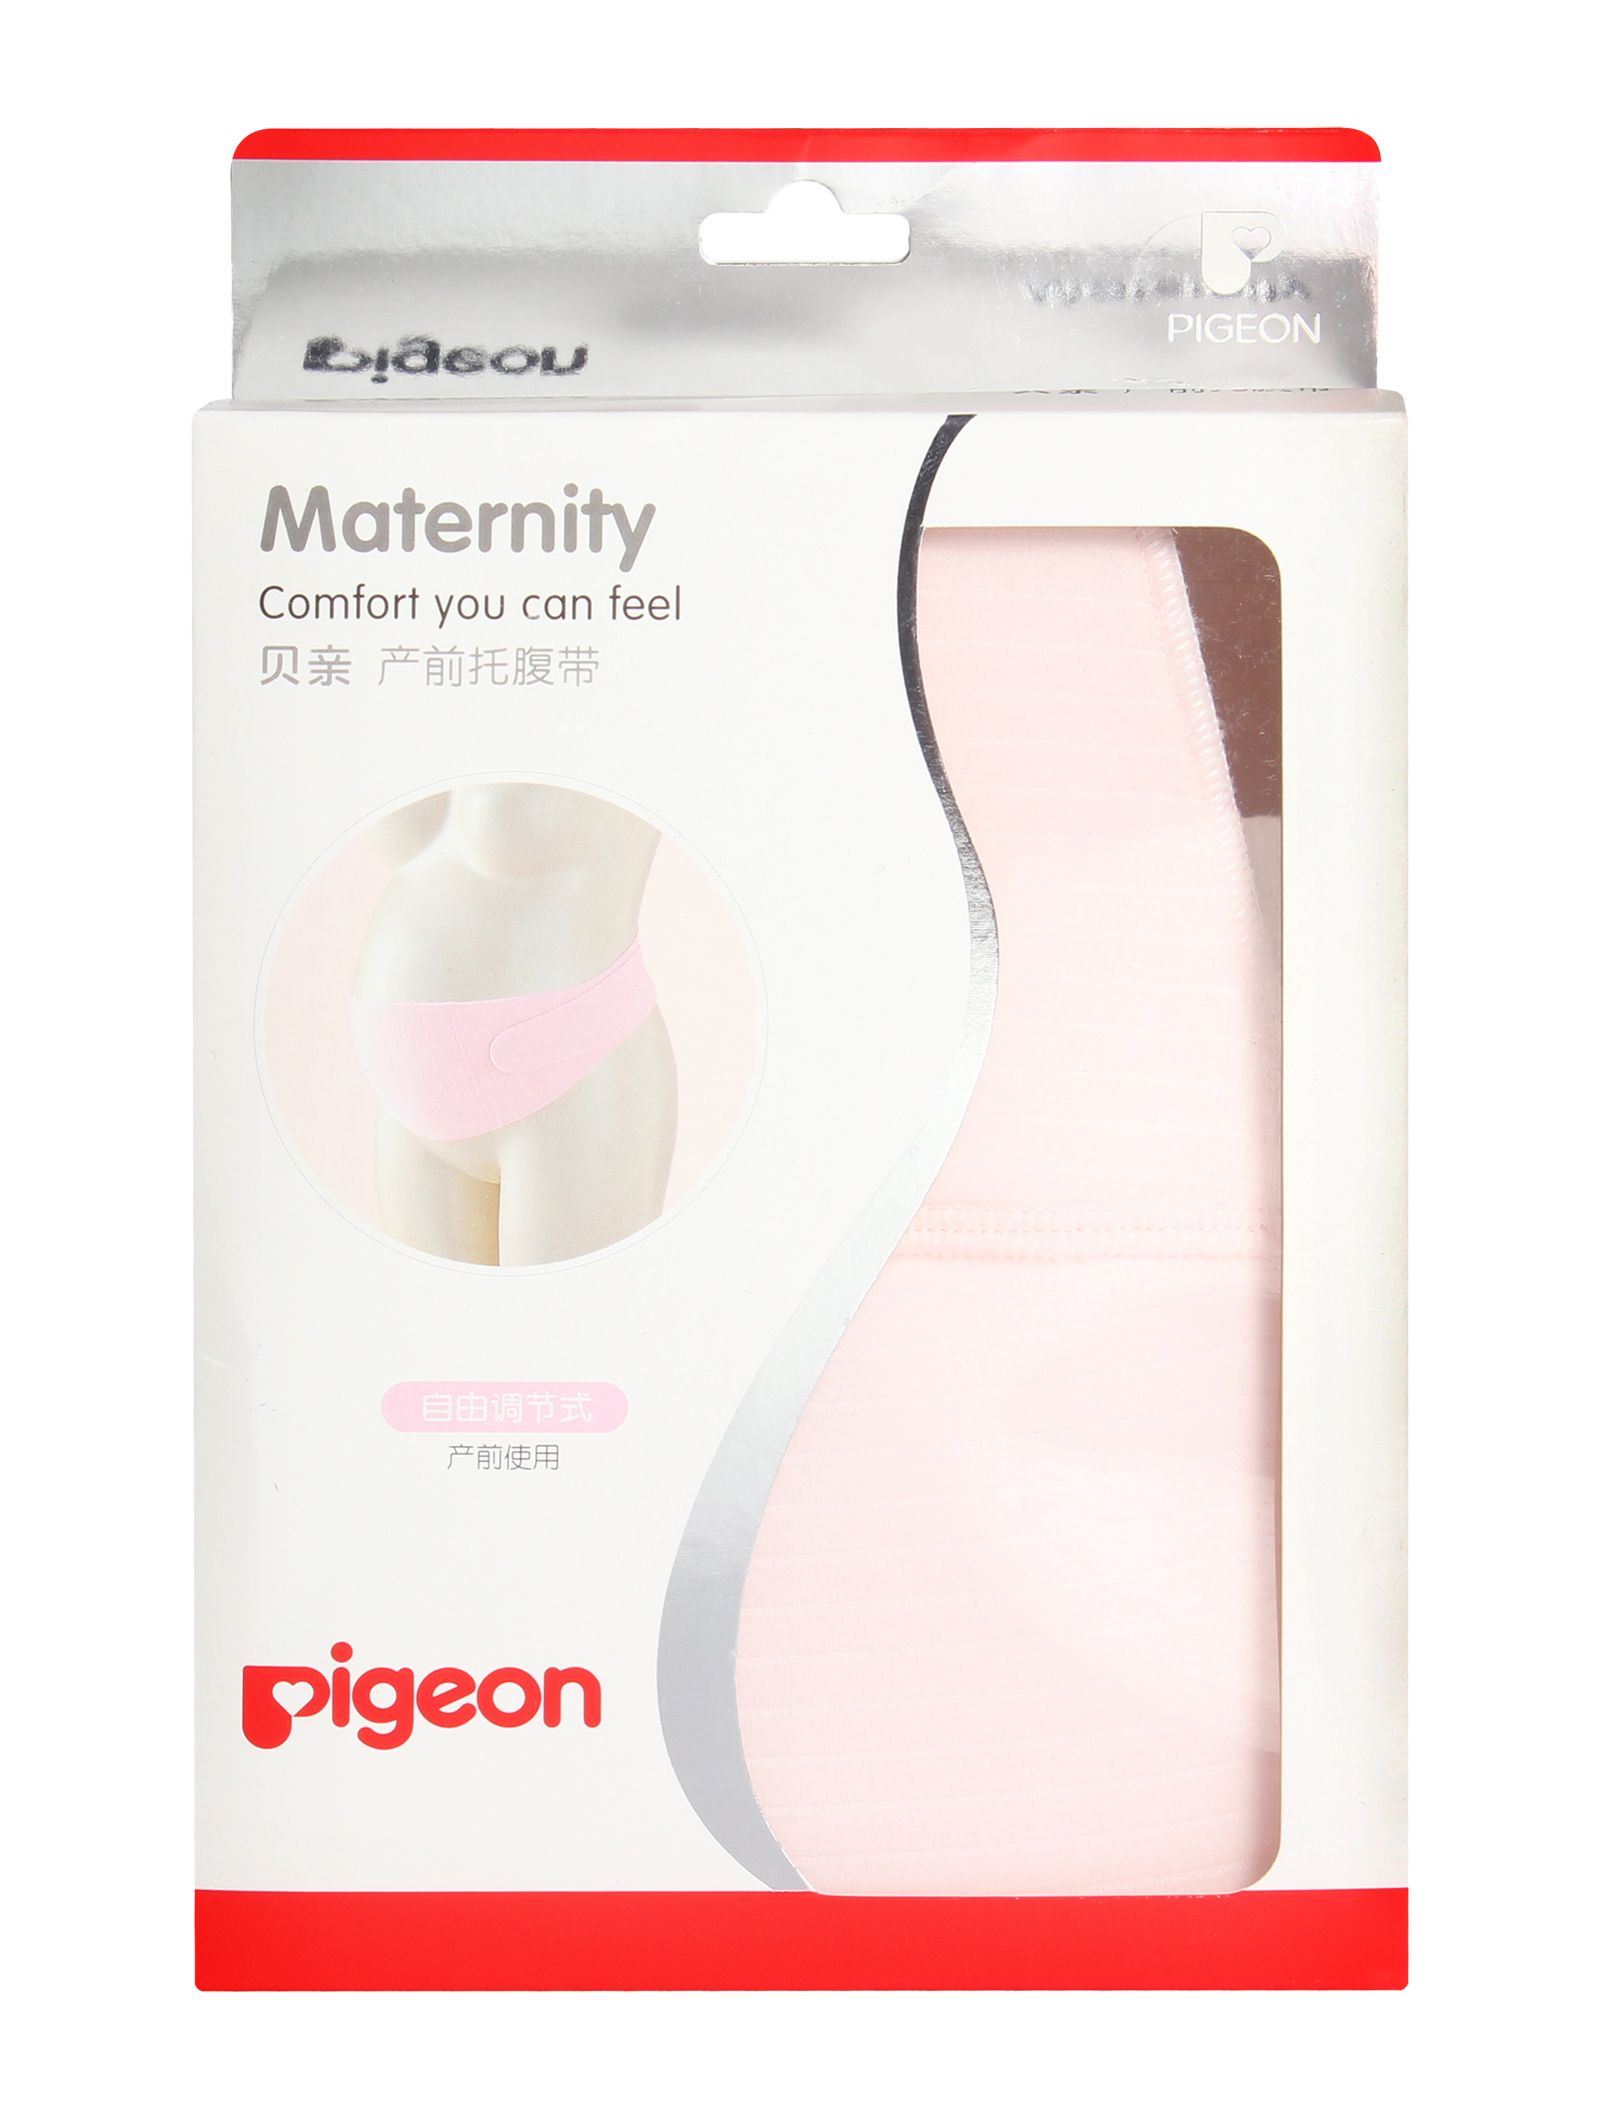 Pigeon - Maternity Comfort You Can Feel